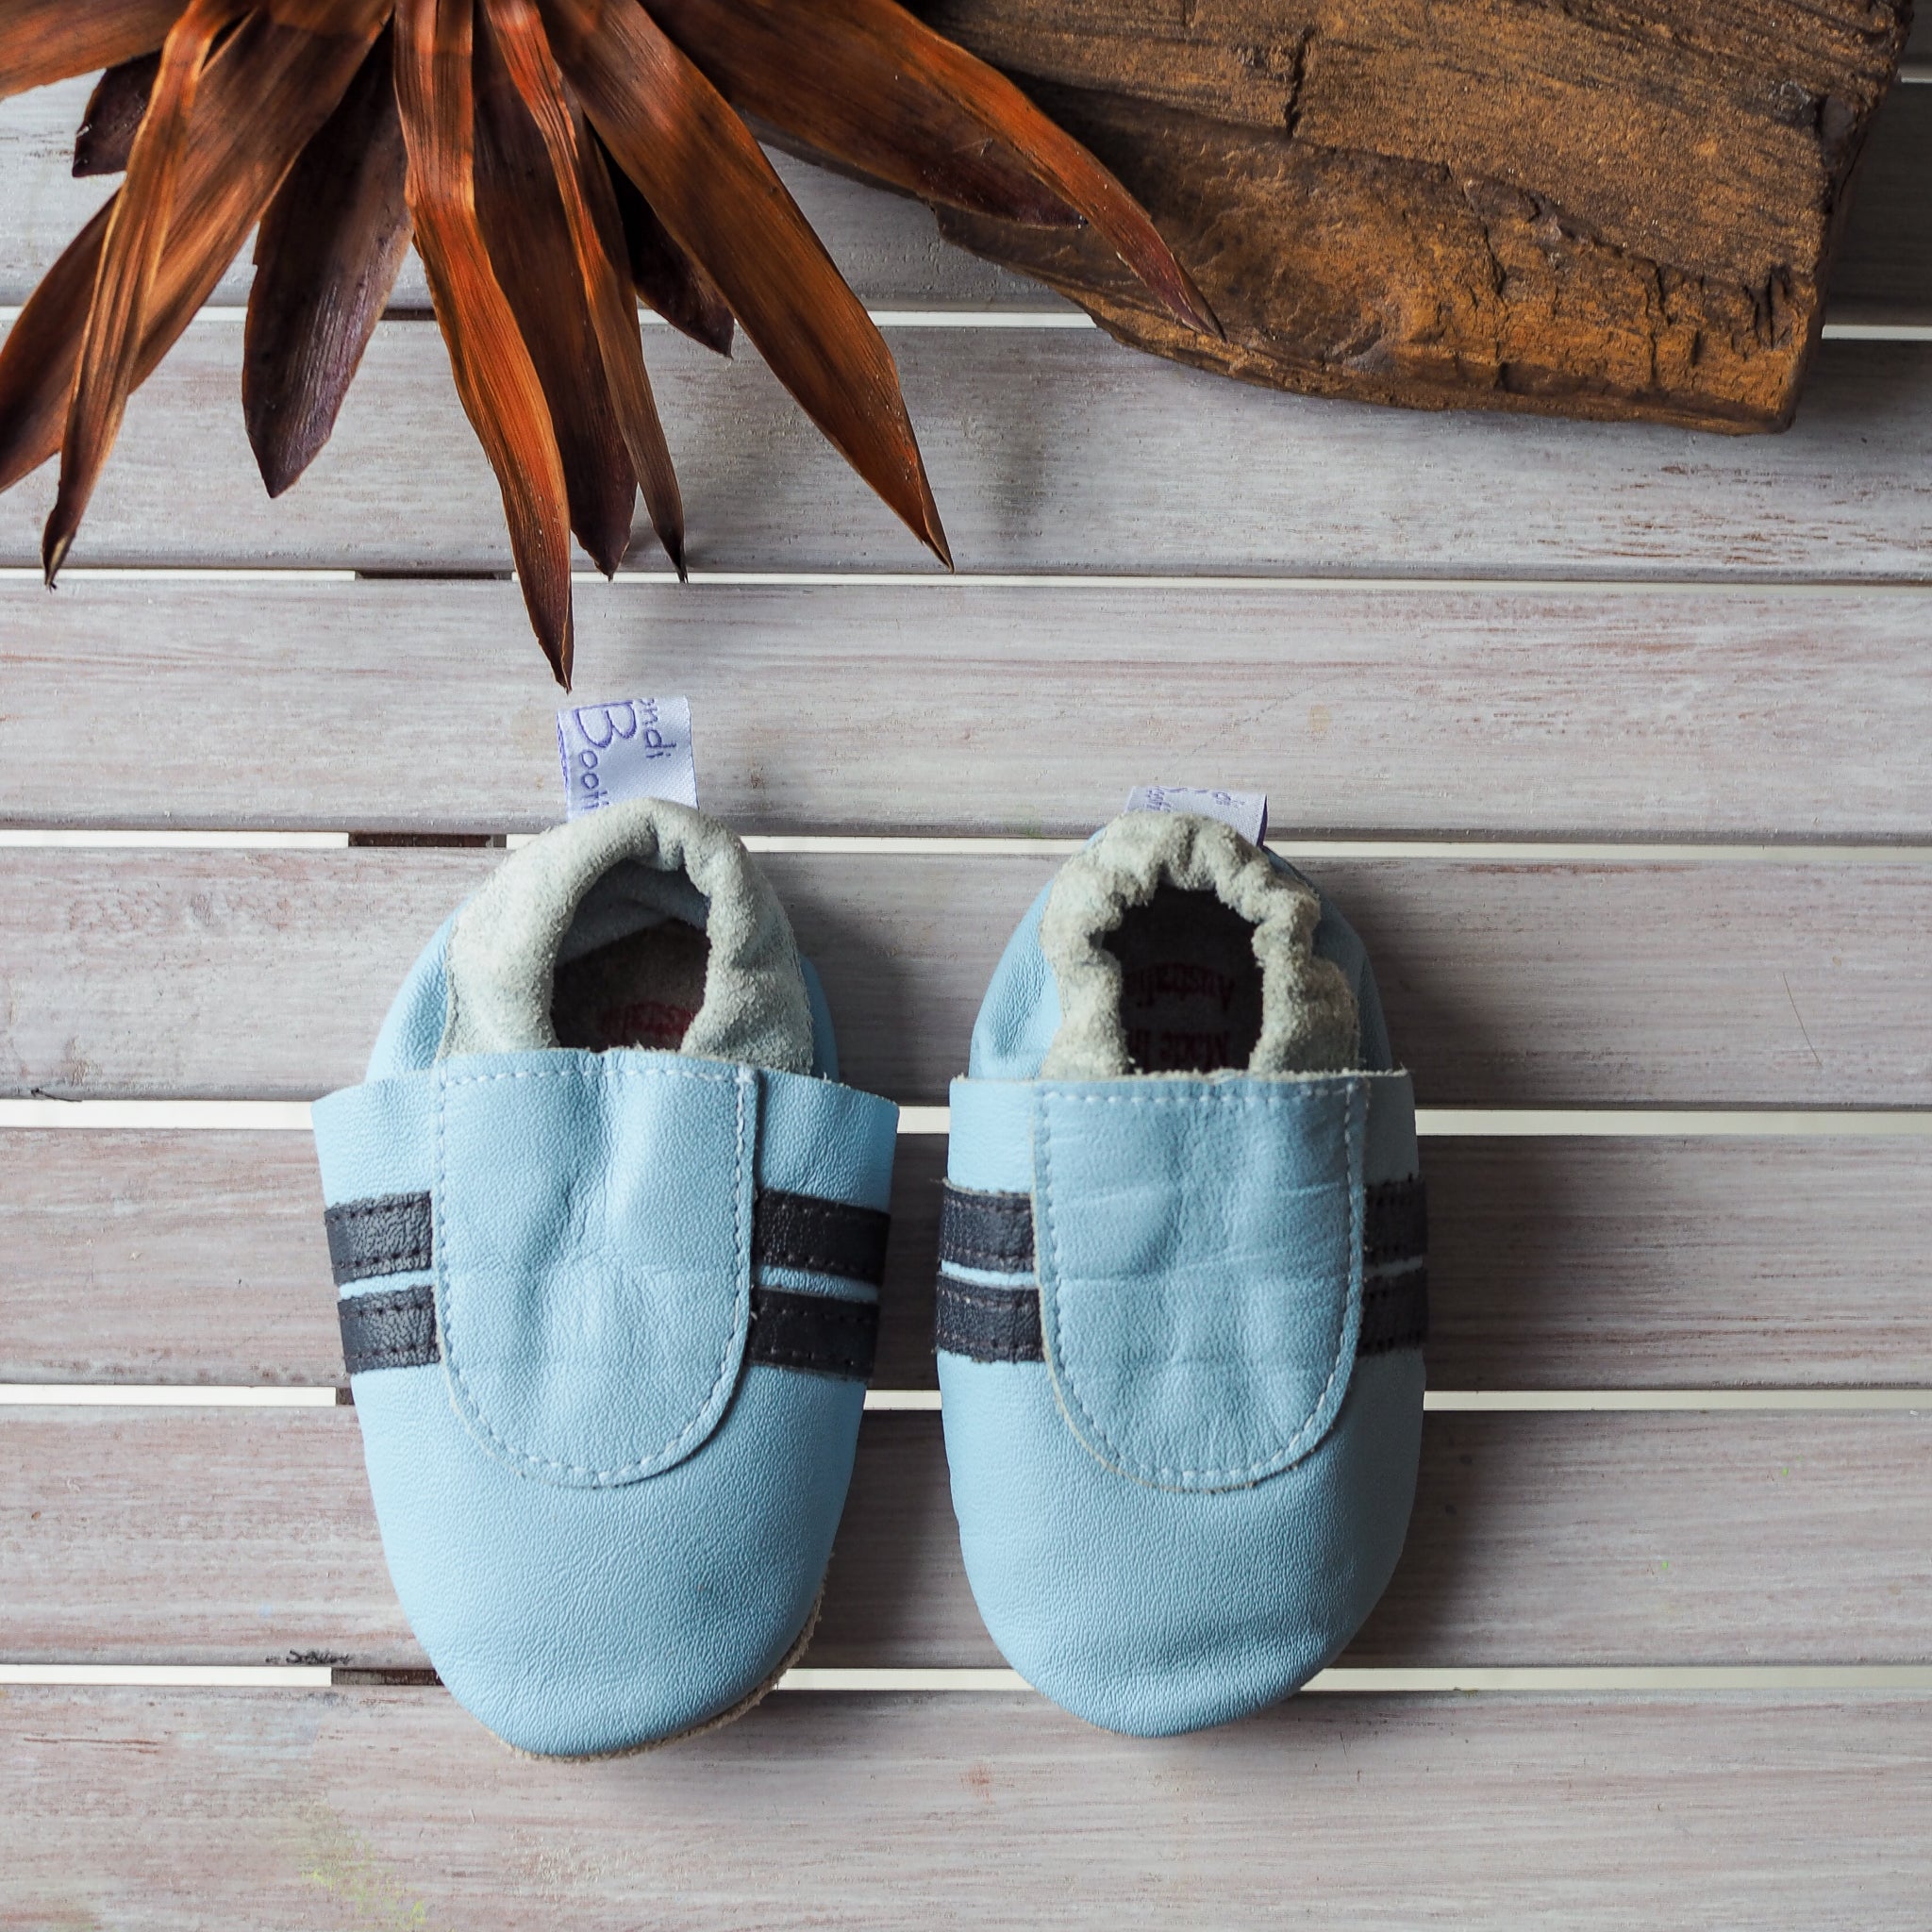 Leather Soft Sole Booti's - Baby Blue/Navy